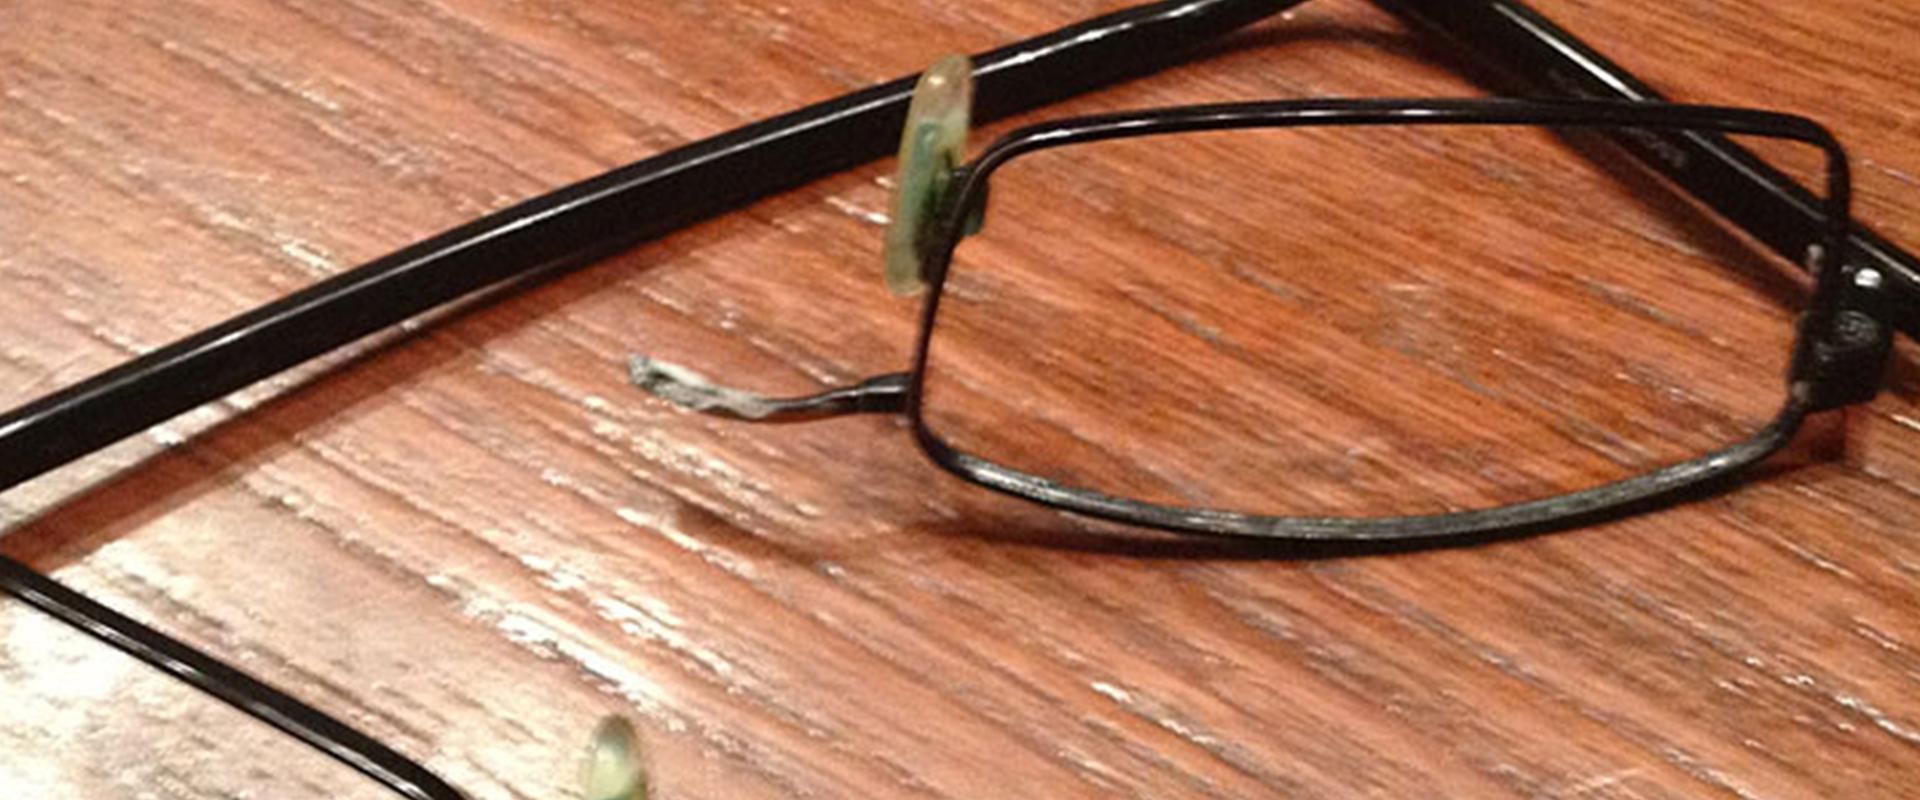 Where Can I Get My Glasses Repaired?